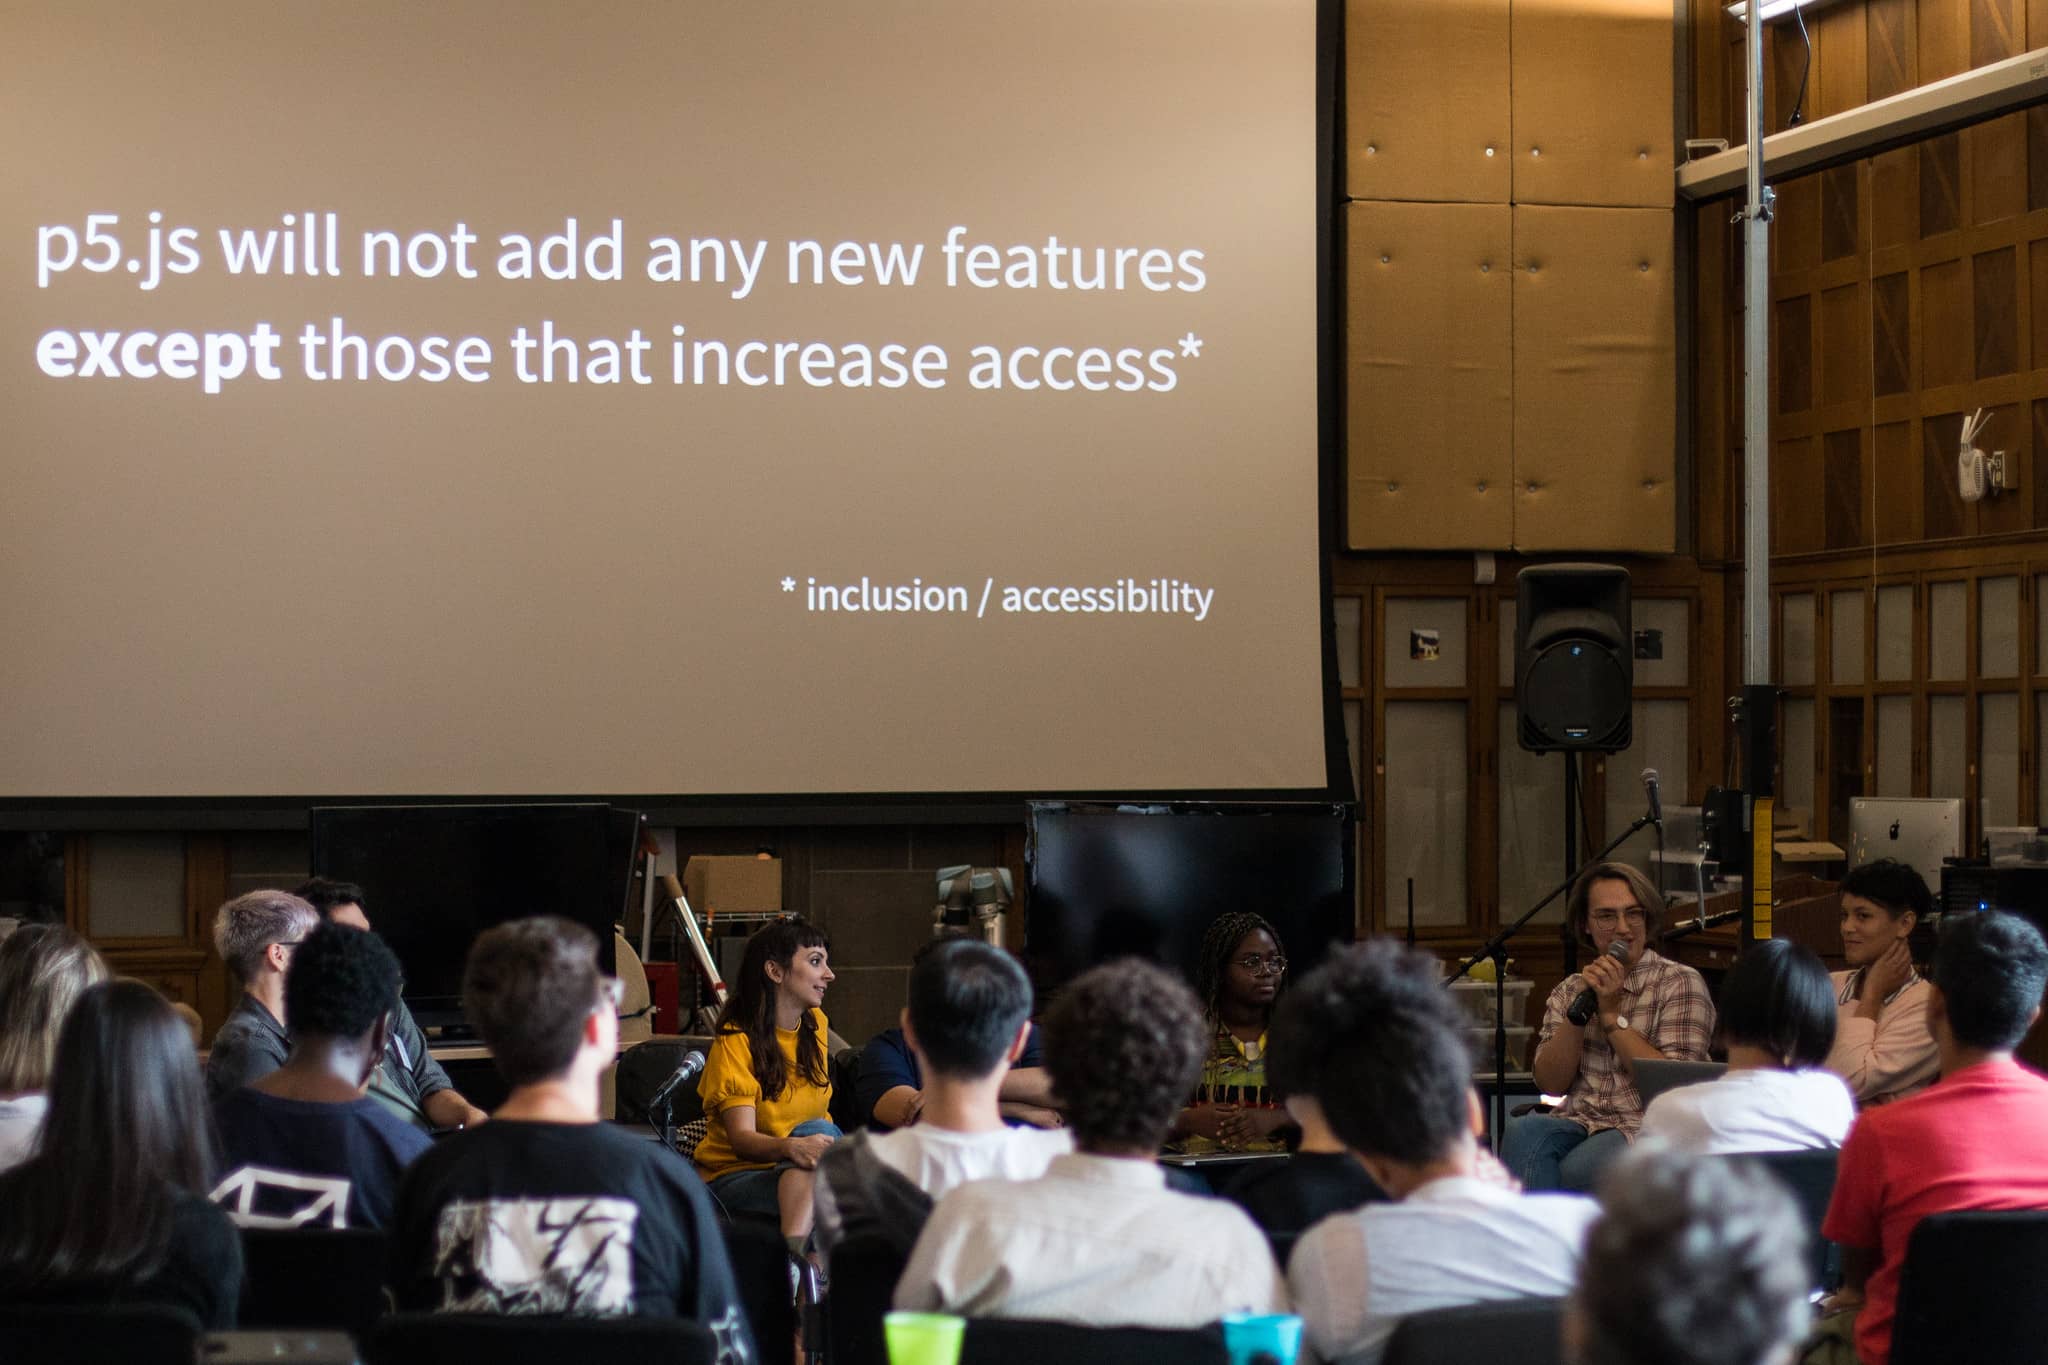 Person with a microphone speaking to fellow participants in front of text that reads p5.js will not add any new features except those that increase access"